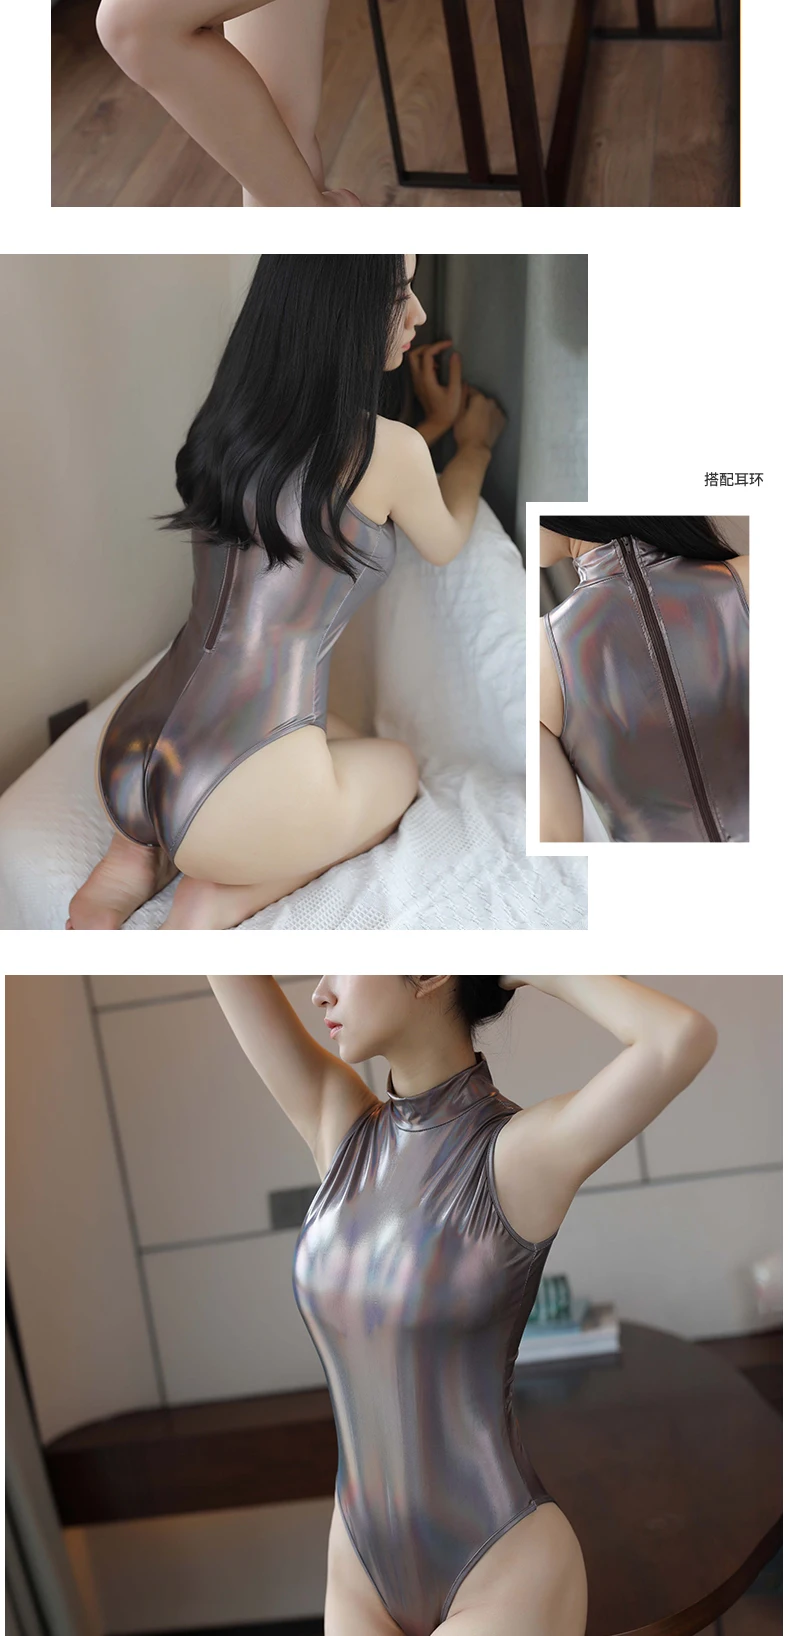 bodysuits Shiny Metallic PU Faux Leather Sexy Bodysuit Shiny High Cut Swimsuit Bathing Suits Leotard Sexy Tights Shaping Wear Stage Wear corset bodysuit